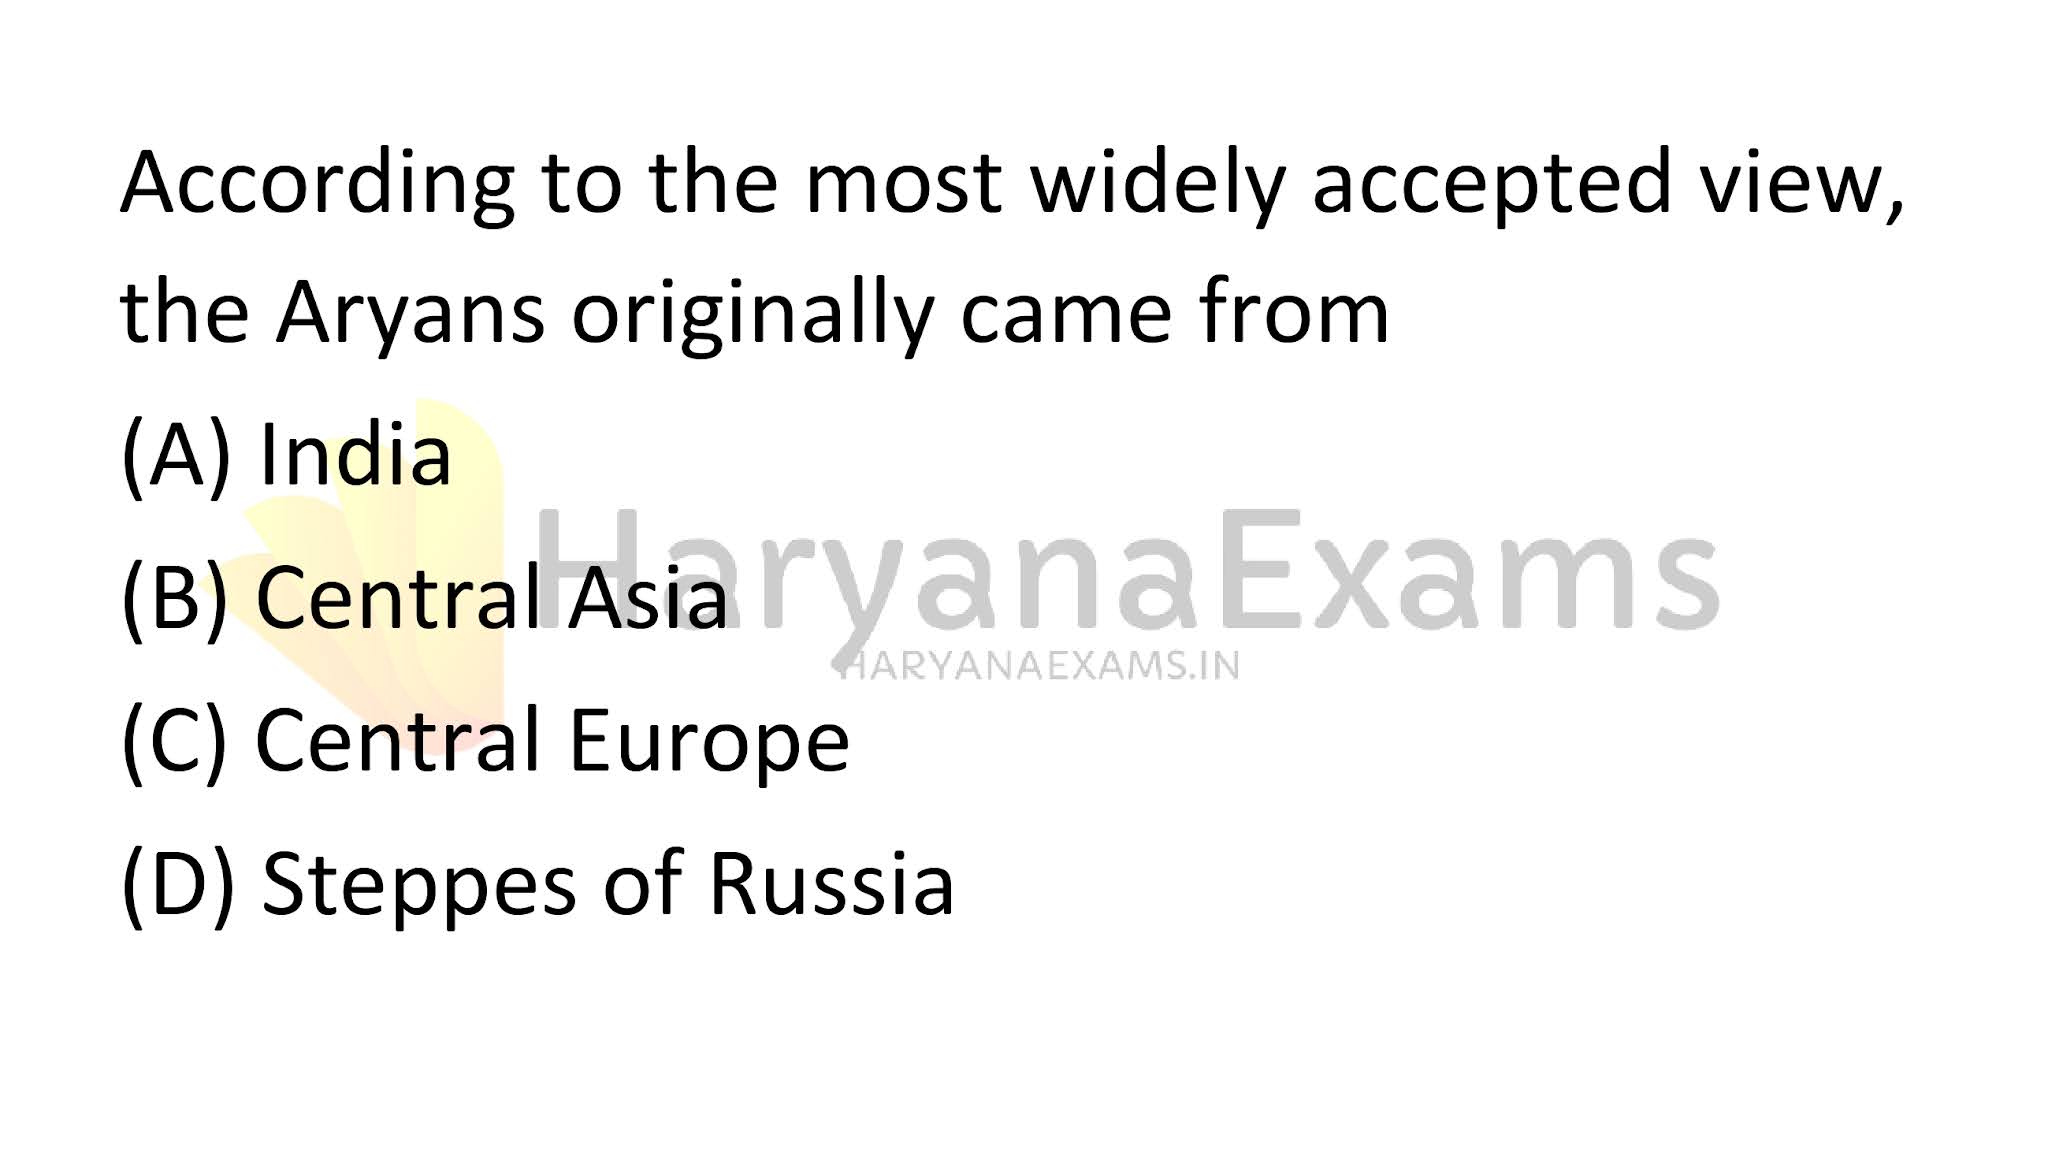 According to the most widely accepted view, the Aryans originally came from